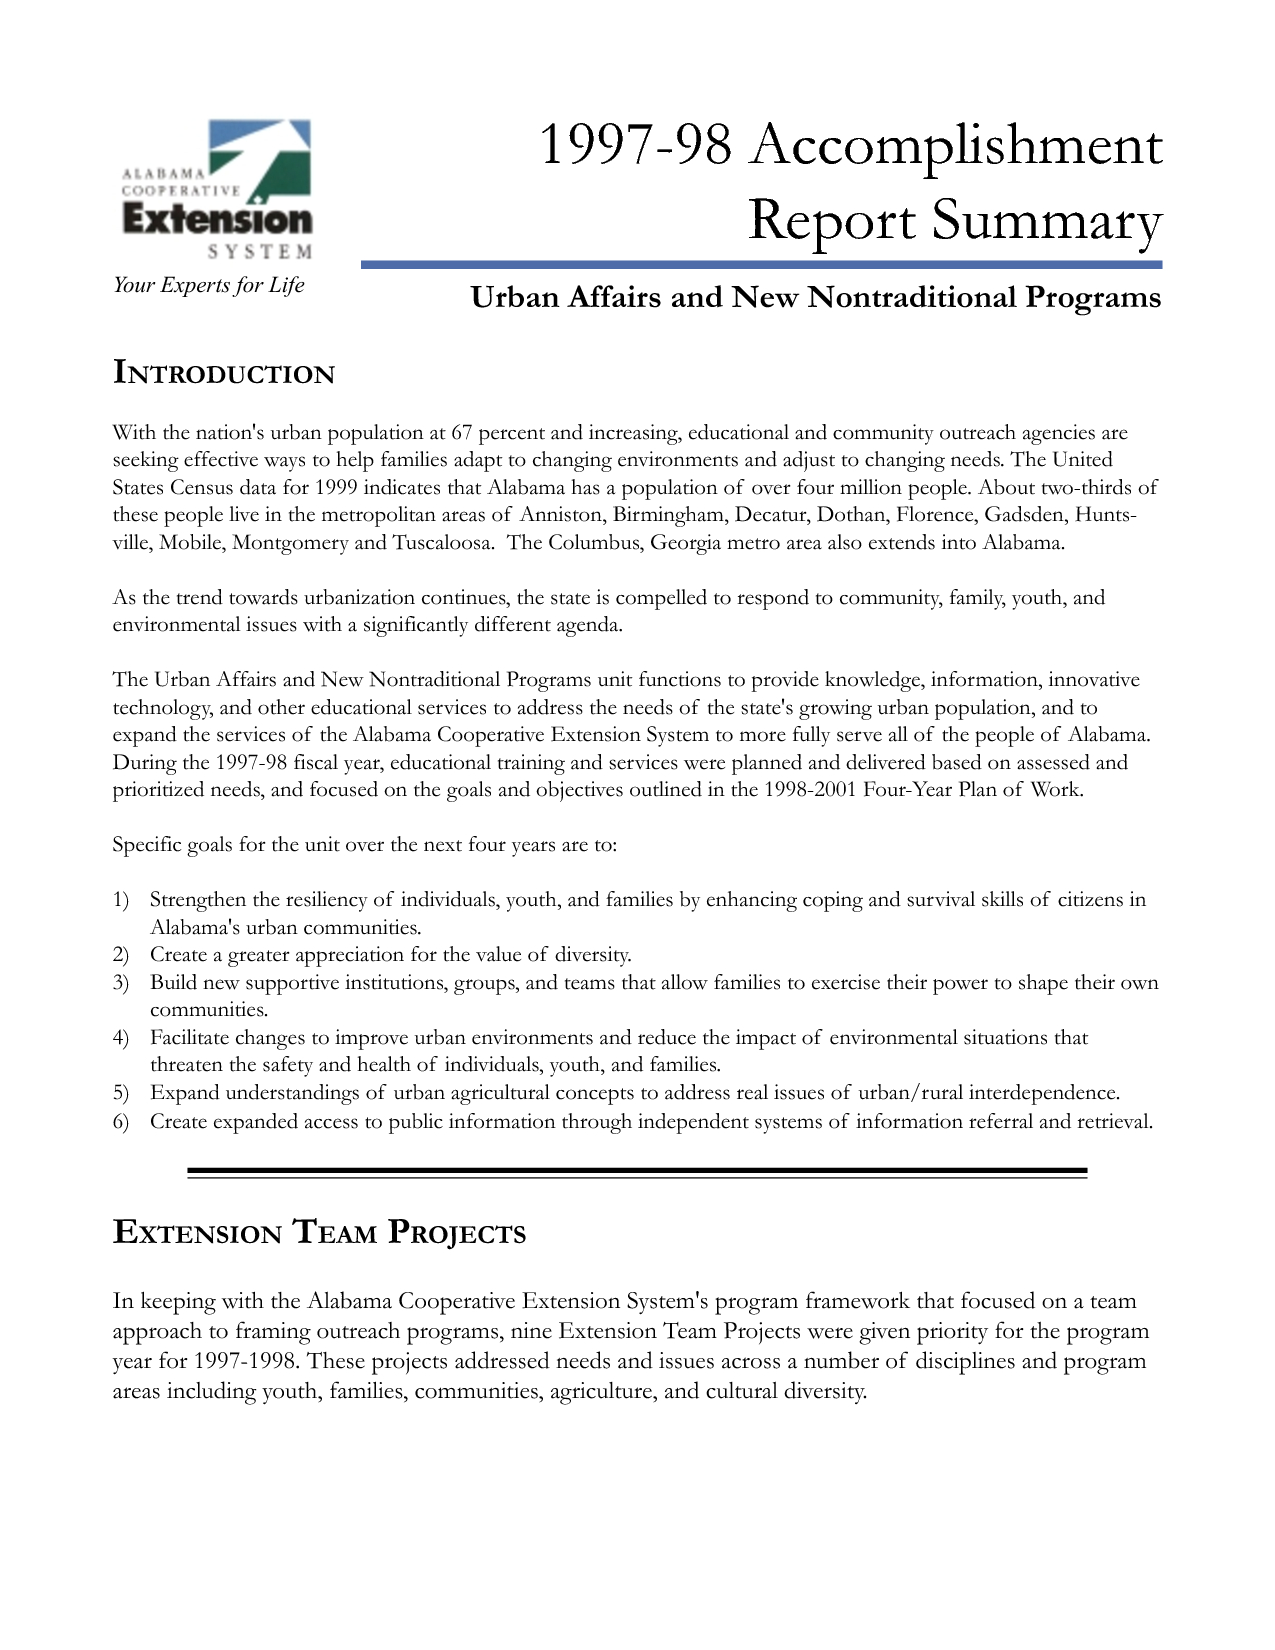 Free Annual Accomplishment Report Summary Sample : V M D Intended For Summary Annual Report Template